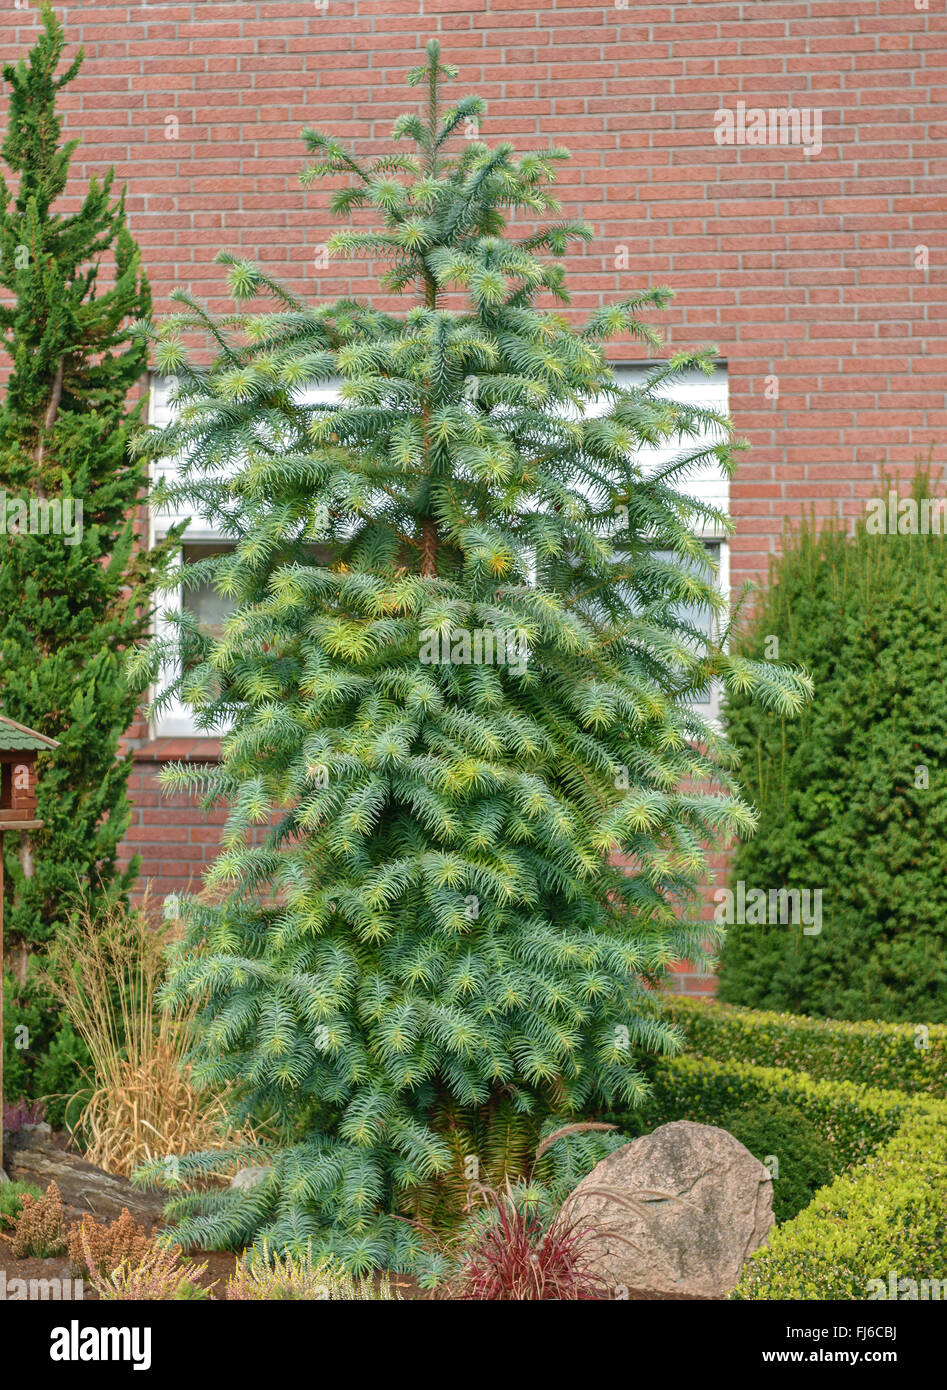 China-Tanne, chinesische Tanne, Blue China-Tanne (Cunninghamia Lanceolata 'Glauca', Cunninghamia Lanceolata Glauca), Sorte Glauca, Deutschland, Niedersachsen, Wiefelstede Stockfoto